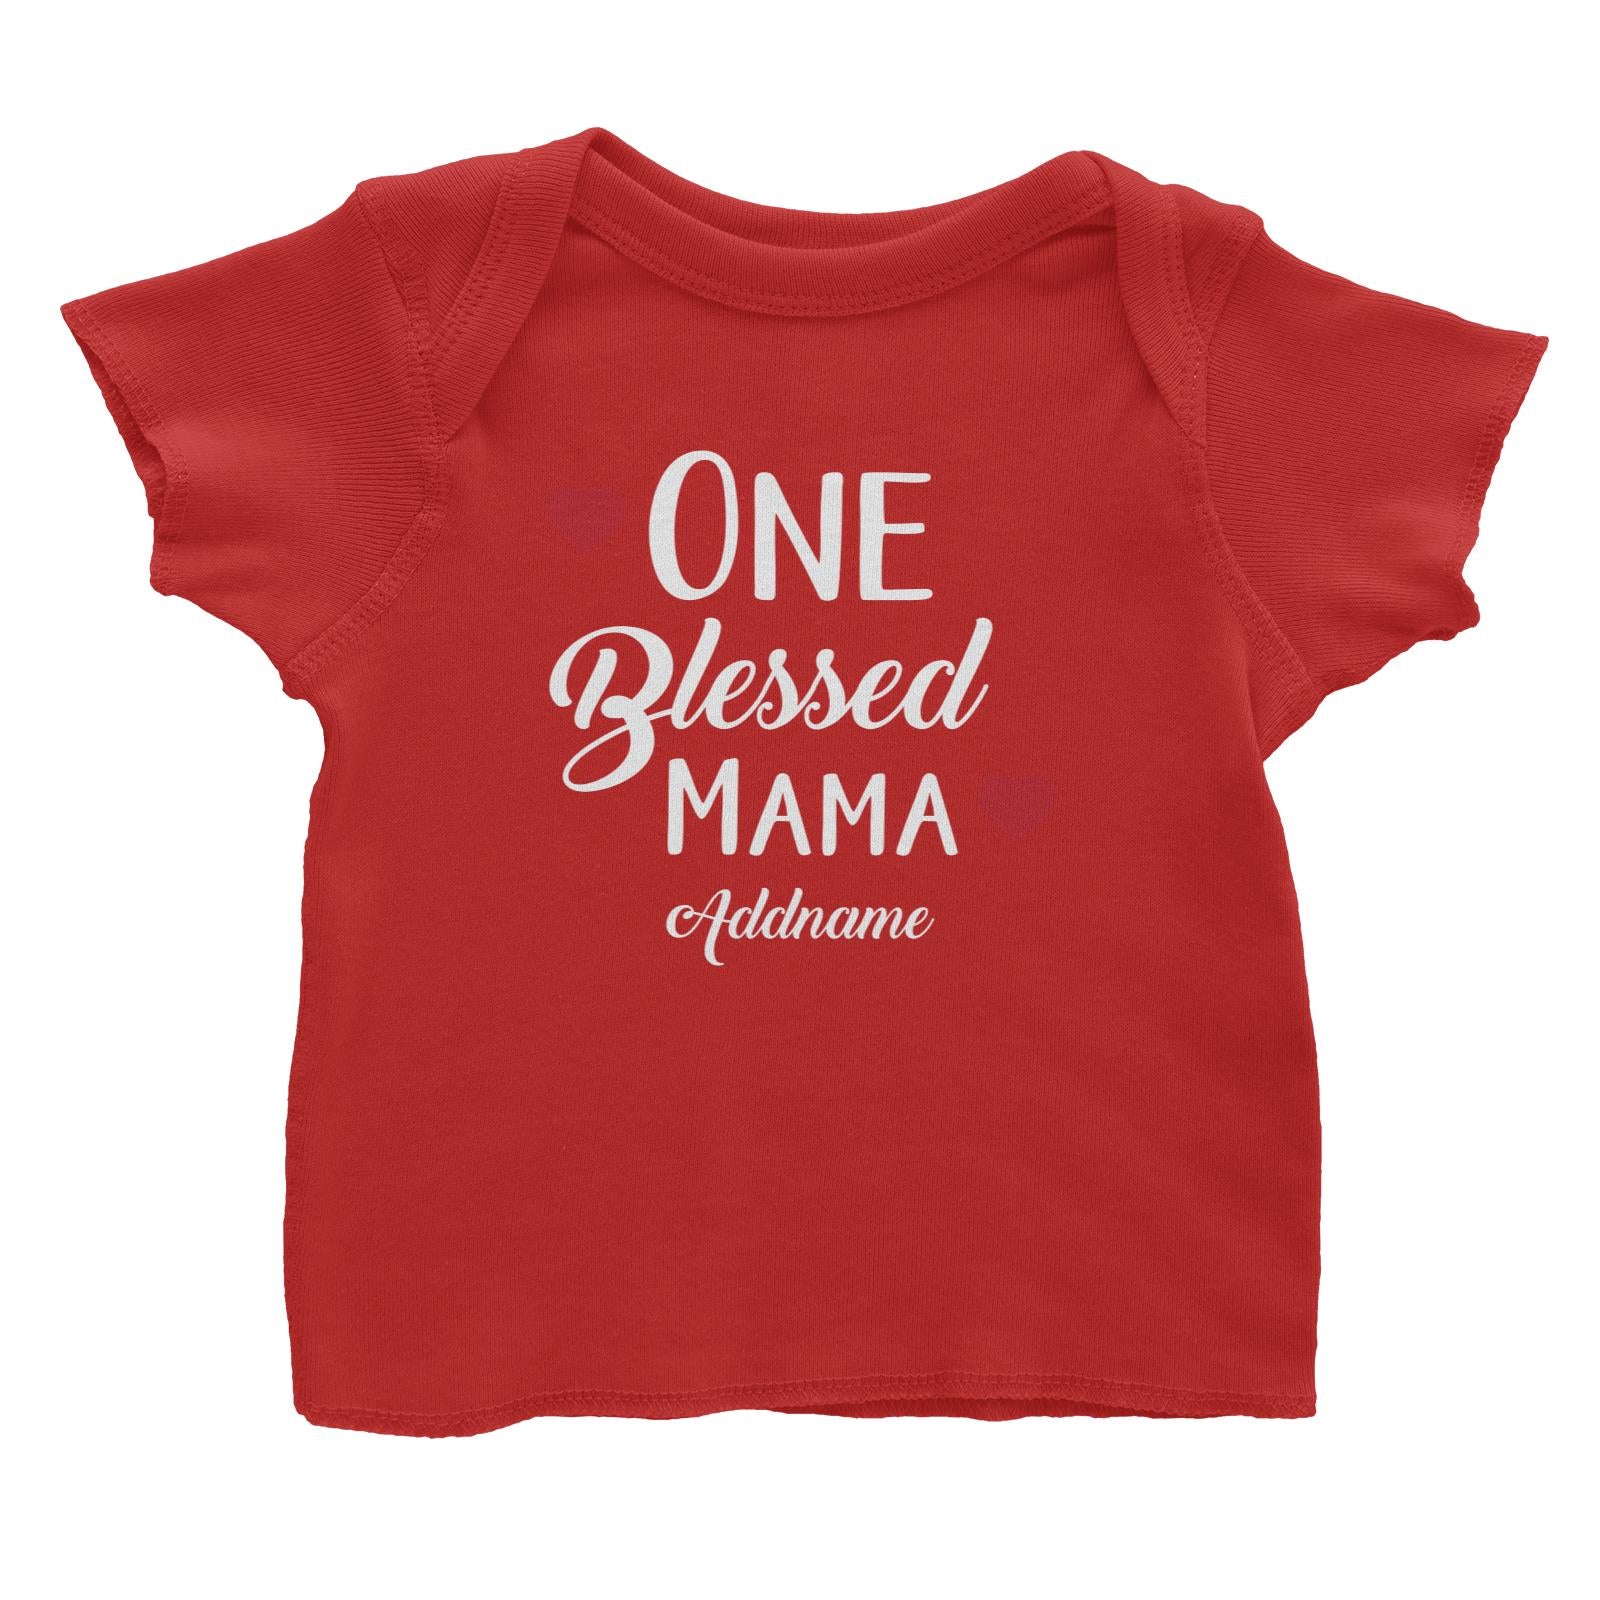 Christian Series One Blessed Mama Addname Baby T-Shirt